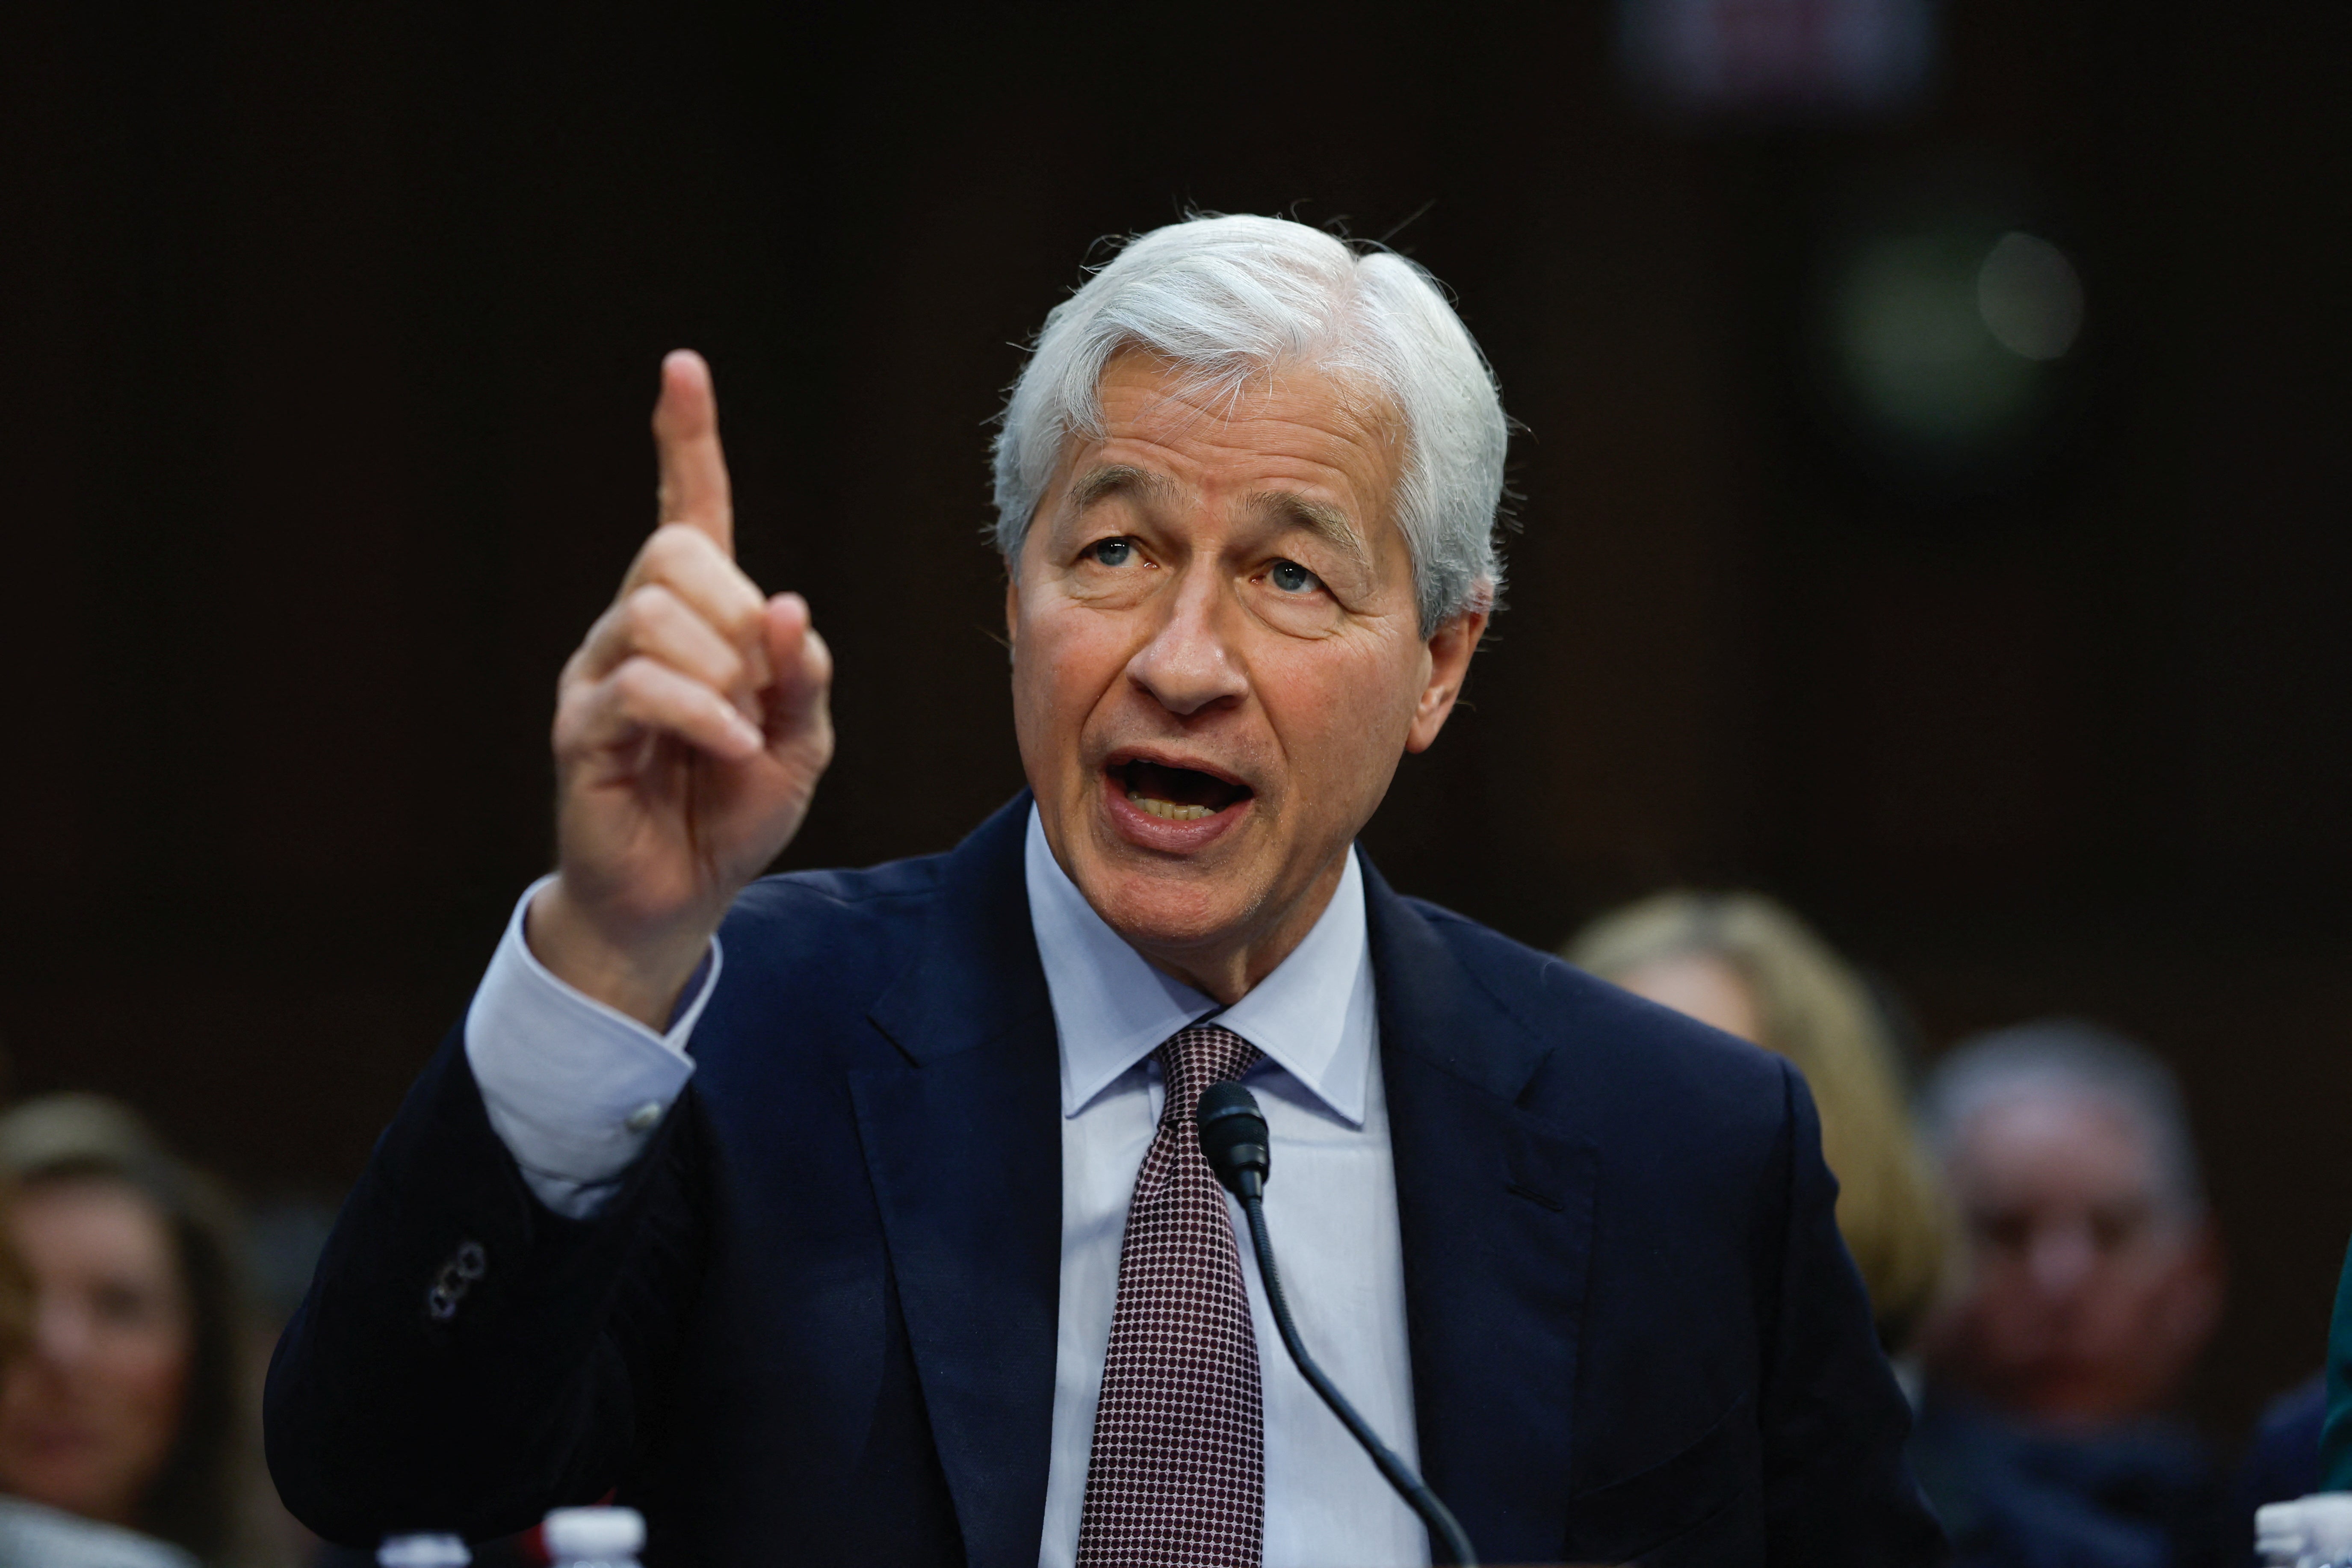 Jamie Dimon, CEO of JPMorgan Chase, Shares Thoughts on AI and Admits that its Impact on Humanity Remains a Mystery